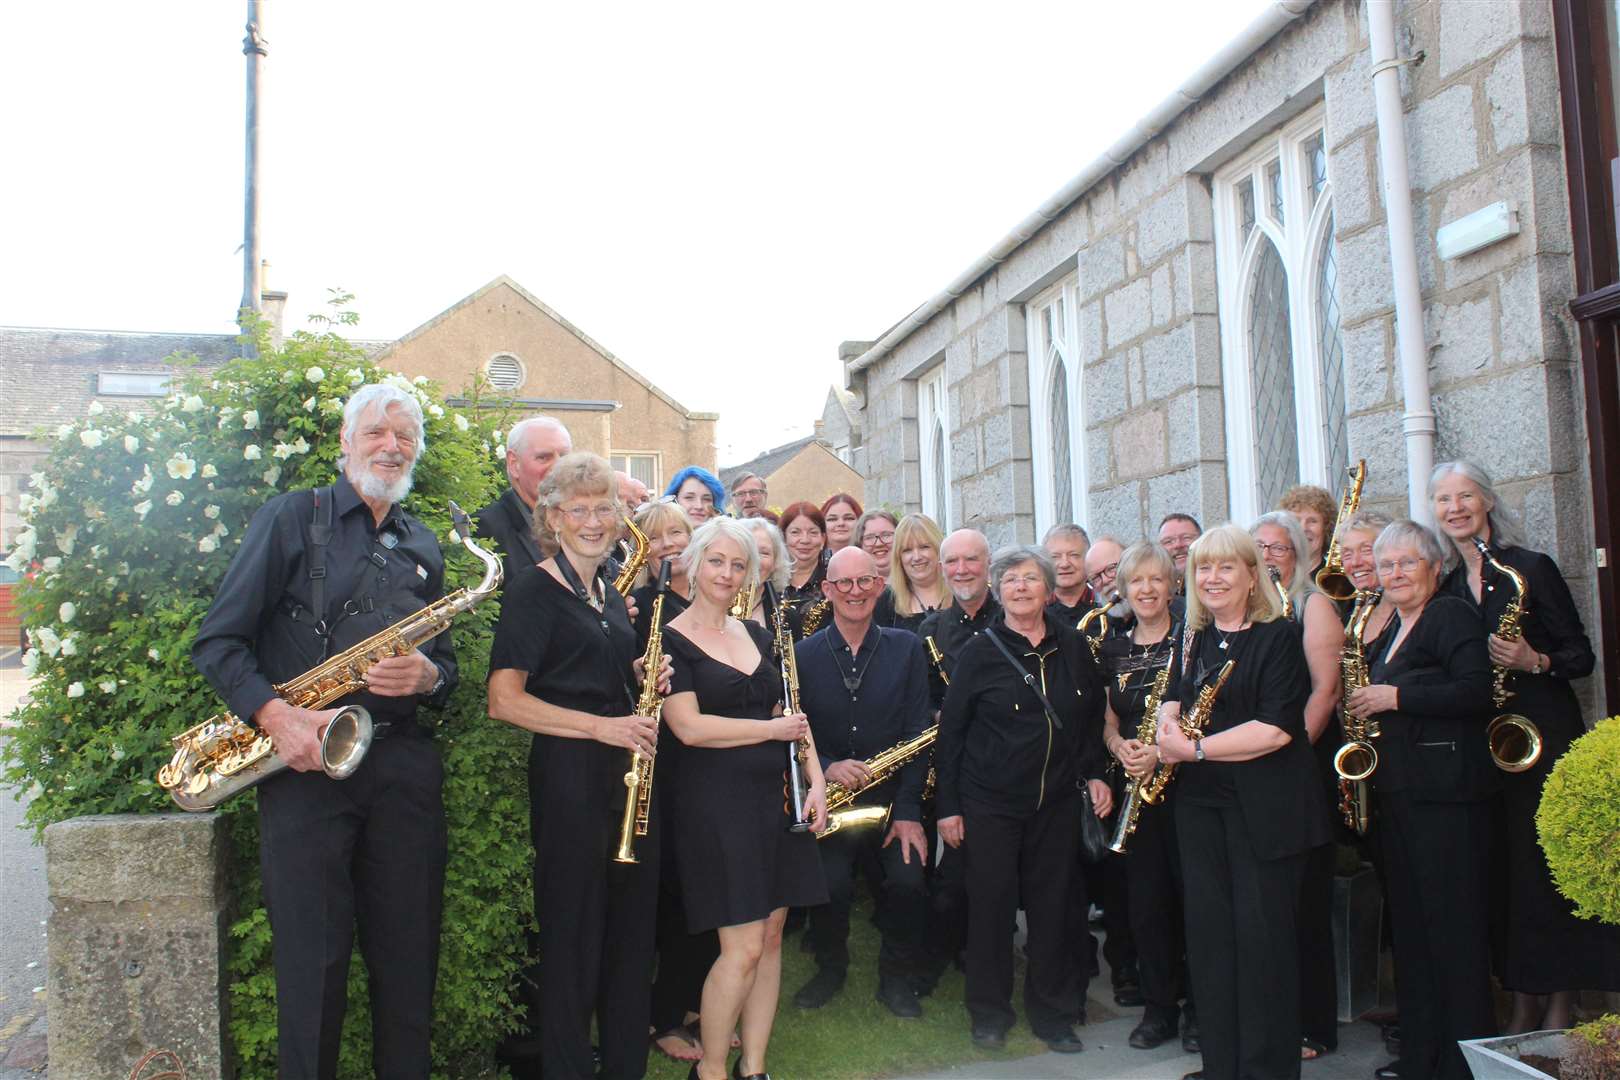 Members of the Aberdeenshire and Phoenix saxophone orchestras getting ready for their concert in the Acorn centre, West High Street, Inverurie on Saturday night . Picture: Griselda McGregor